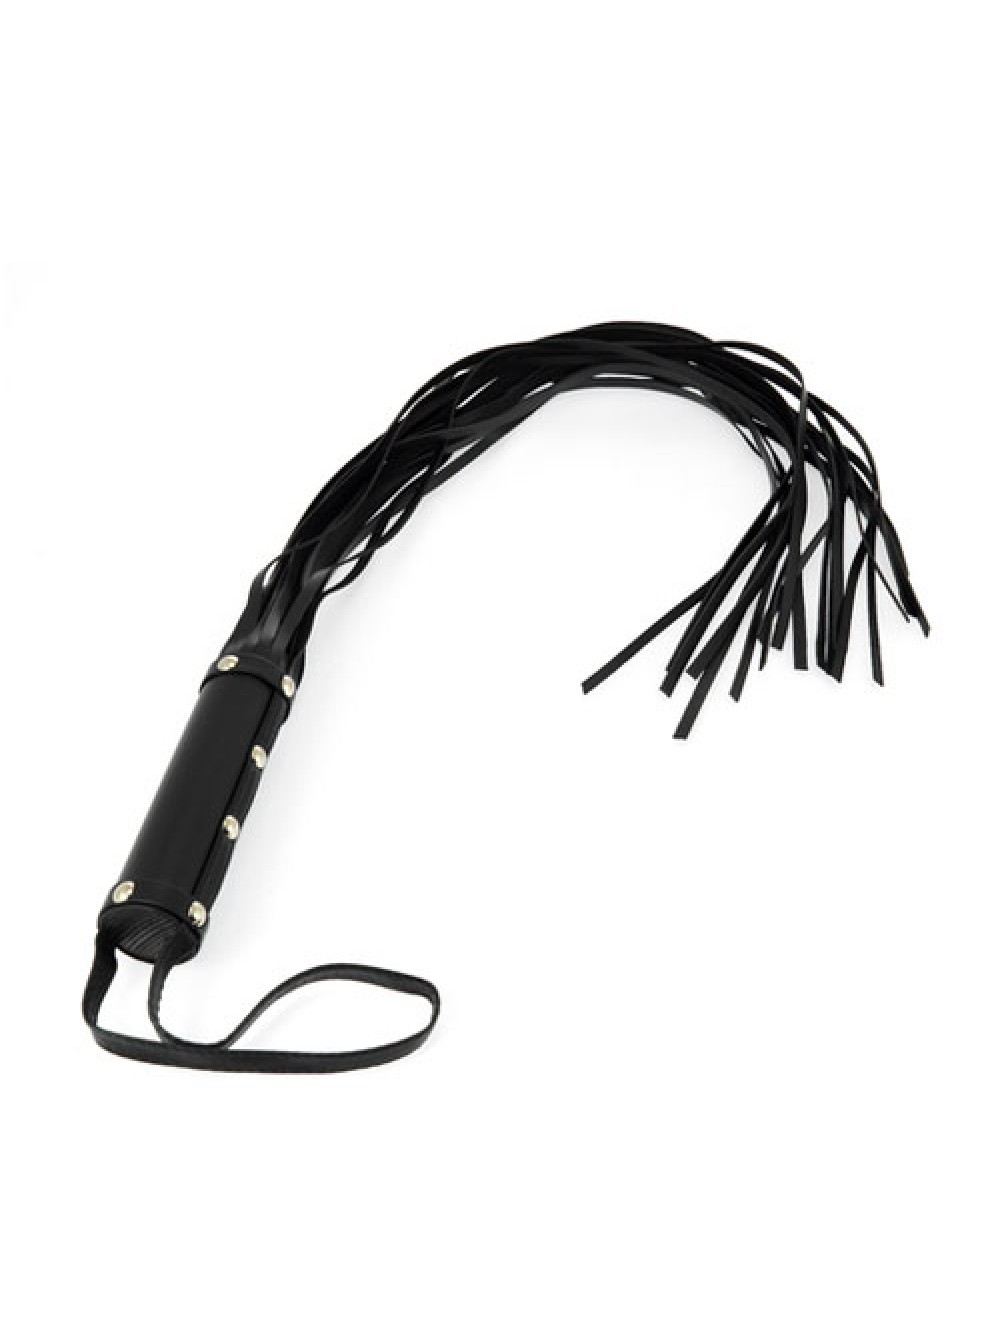 Leather Whip 30 Inches 8718924230602